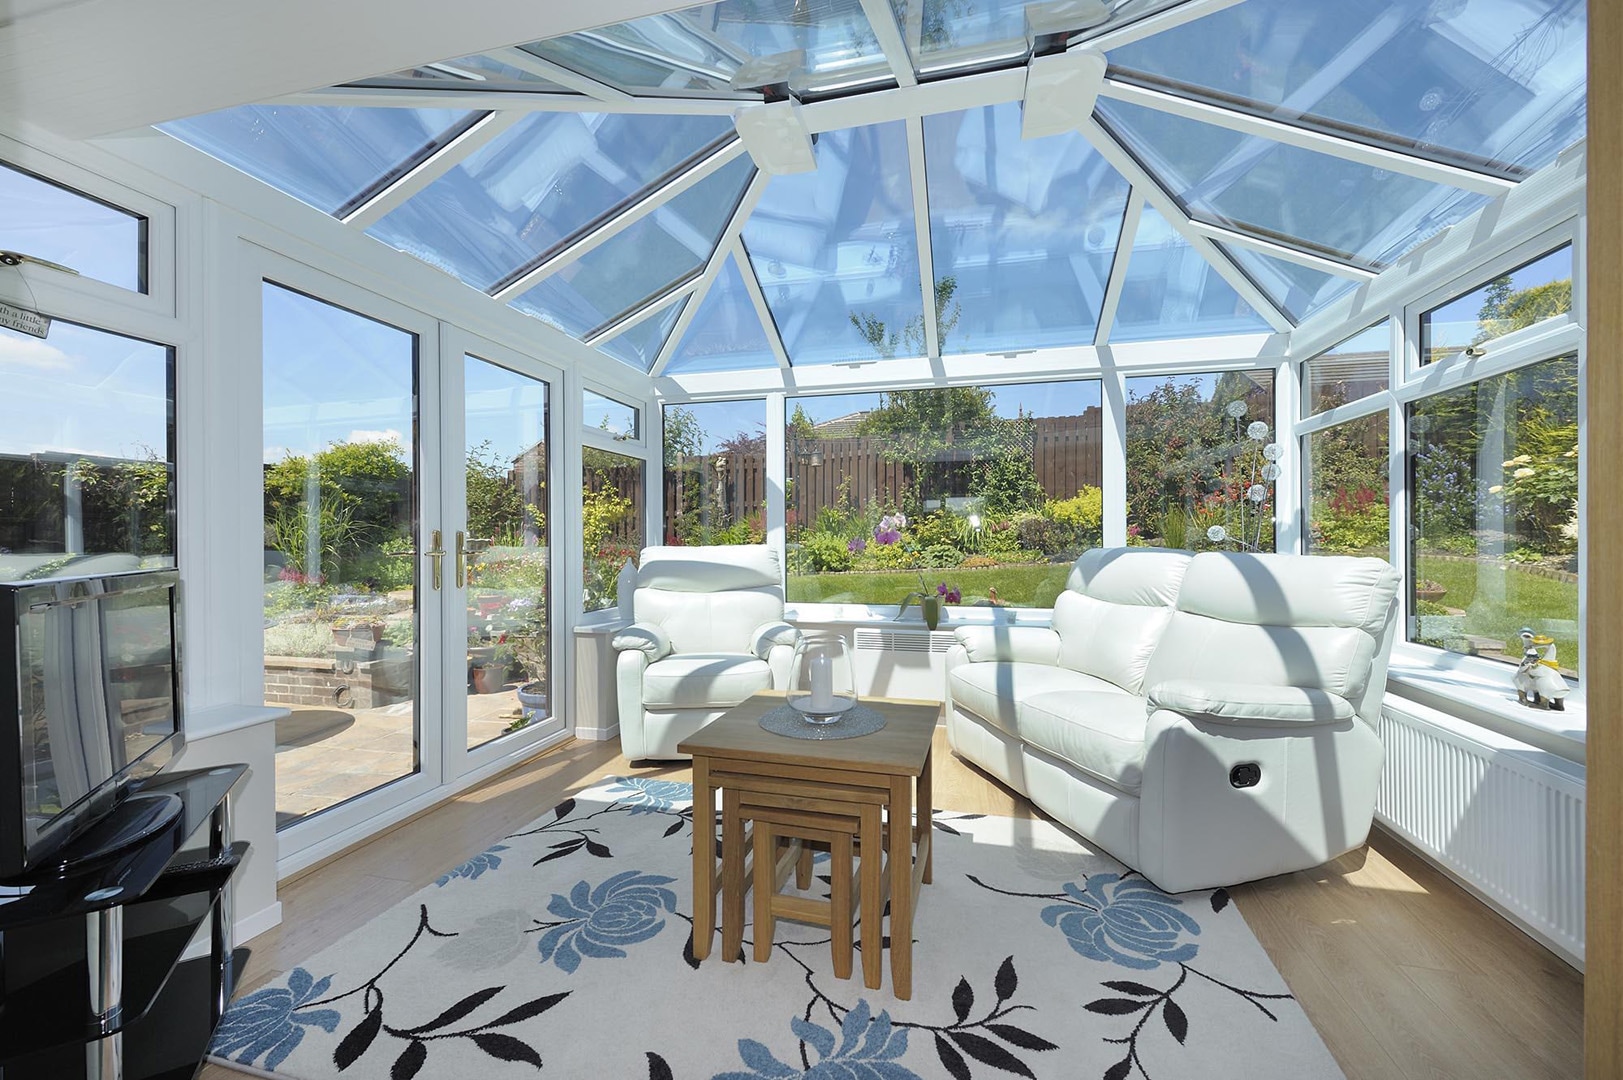 Modern conservatory upgrade featuring sleek glass panels and contemporary design elements, integrated with a traditional home to create a harmonious blend of old and new architectural styles.